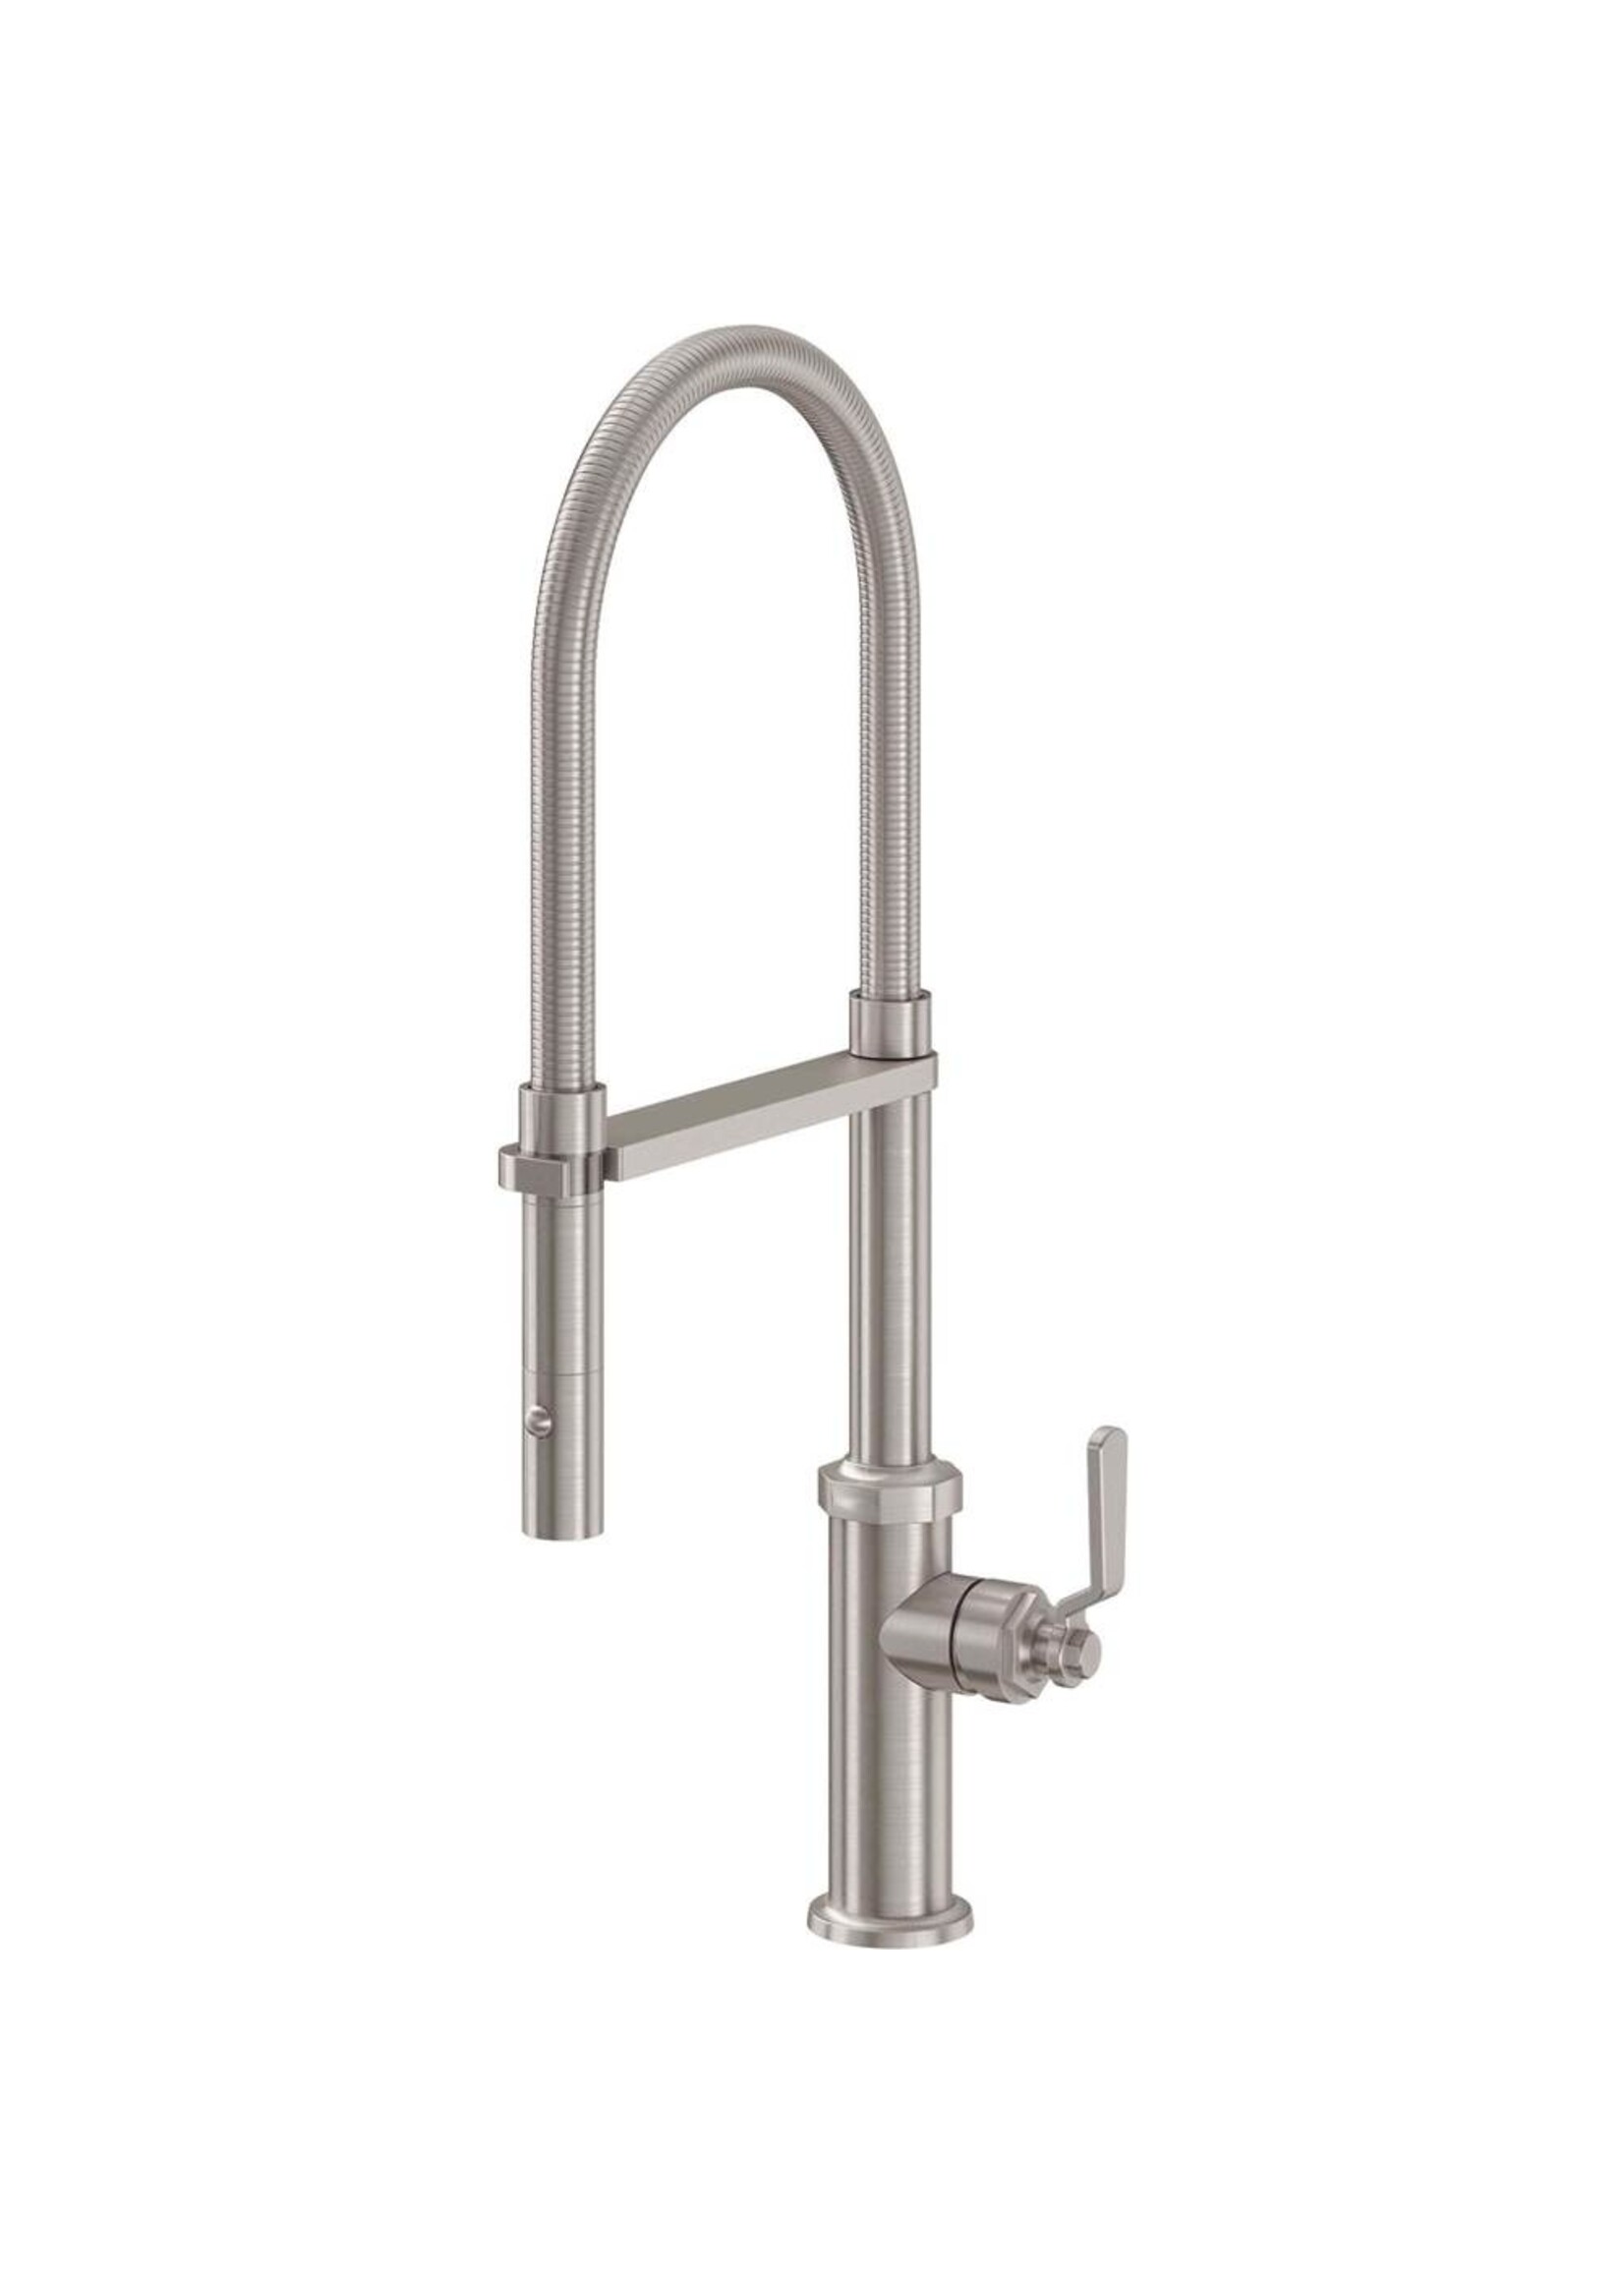 California Faucets California Faucet Descanso Culinary Pull-Out Kitchen Faucet w/Custom HDL - Standard Finish